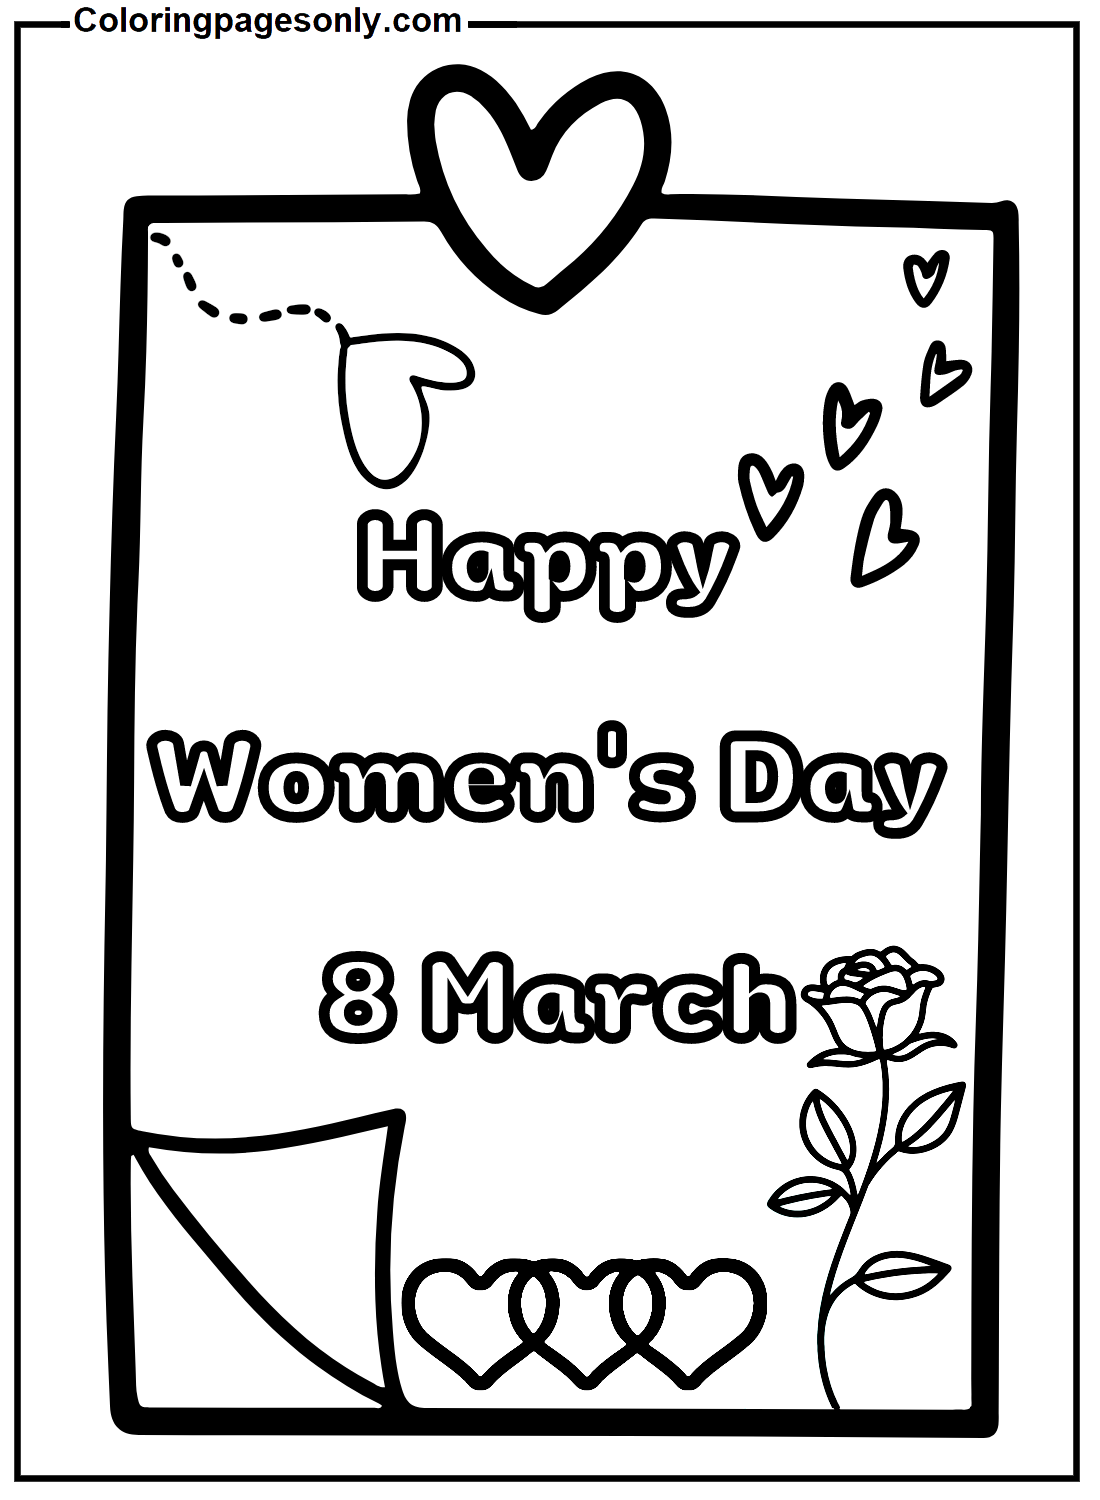 Happy Women's Day 8 March Coloring Pages